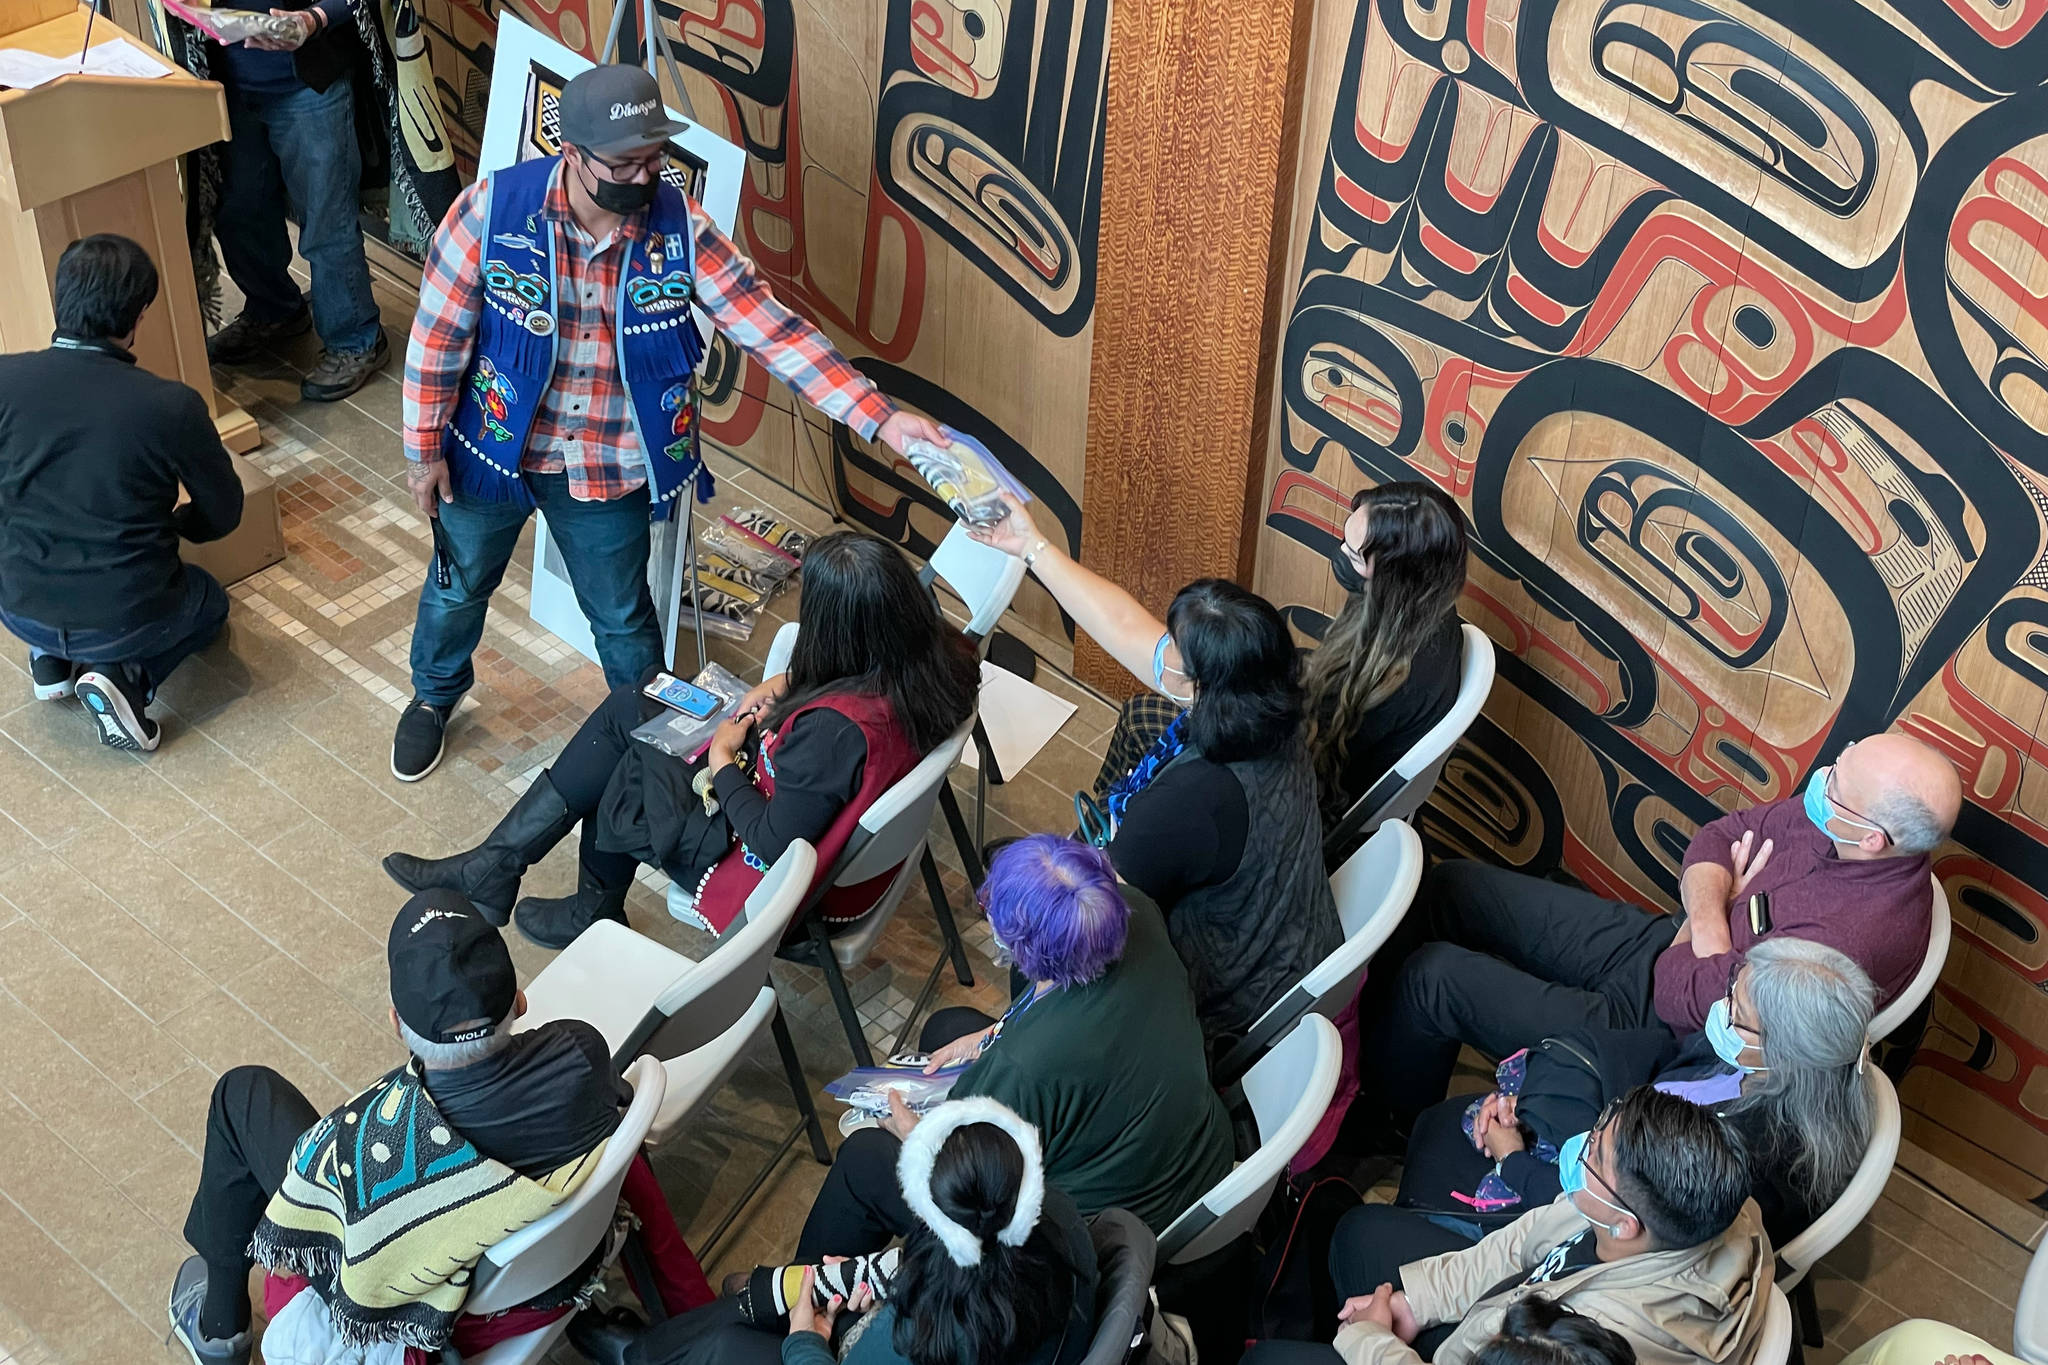 Michael S. Lockett / Juneau Empire
Participants in a ceremony commemorating the settlement of an intellectual property lawsuit against a fashion company take cuttings of the commercial garment at the center of the case on Friday, Aug. 13, 2021.